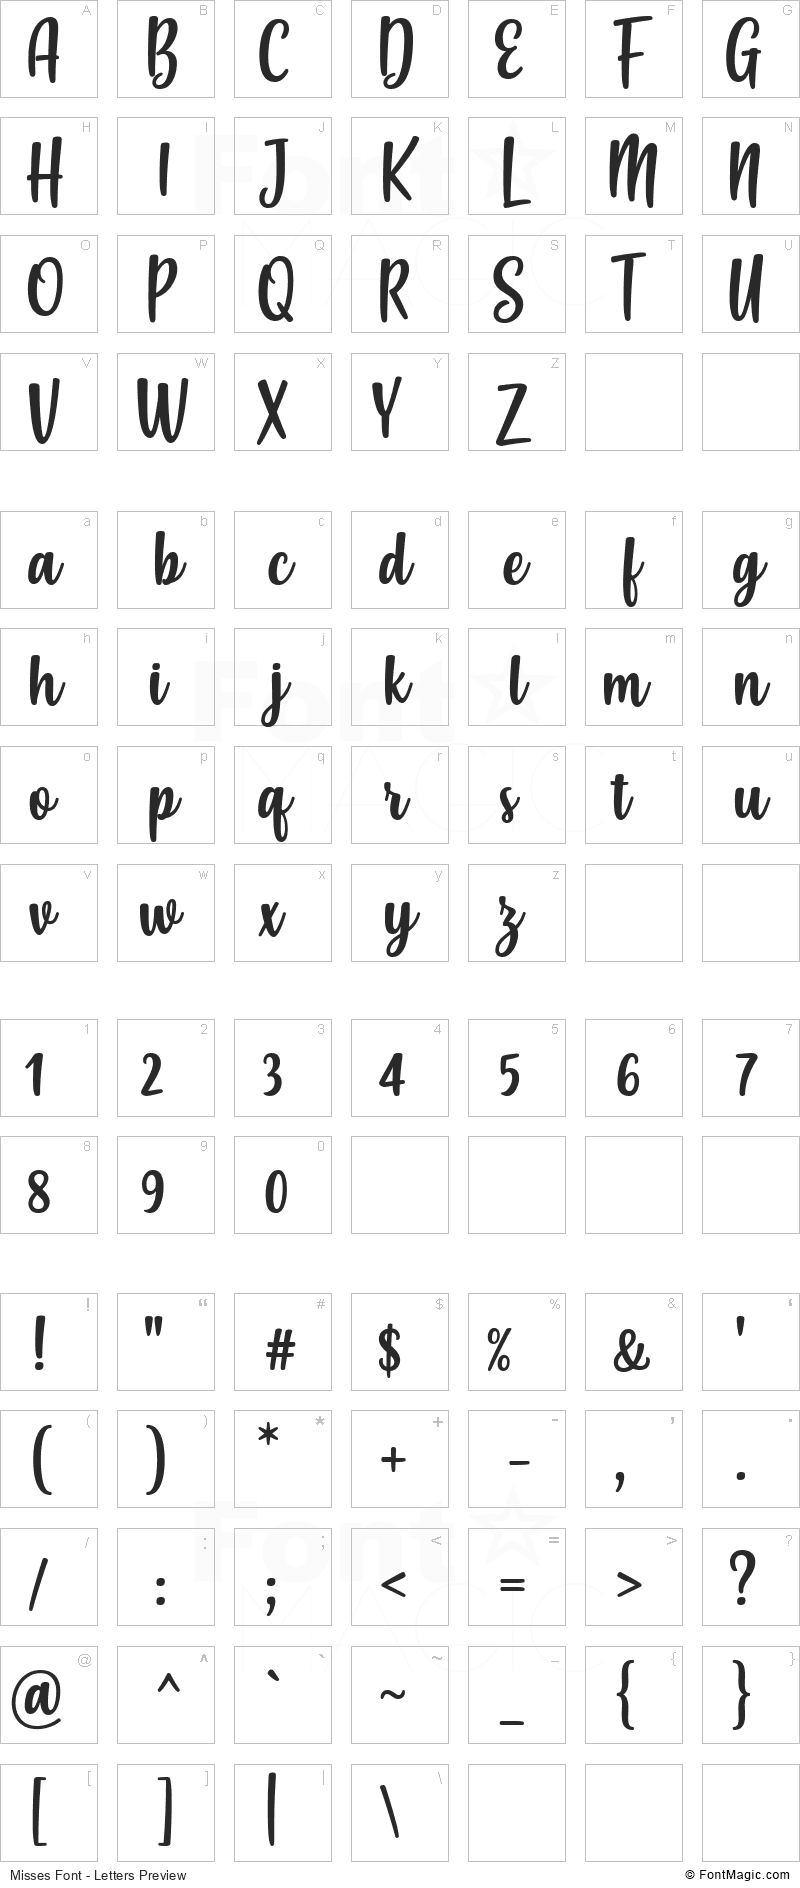 Misses Font - All Latters Preview Chart